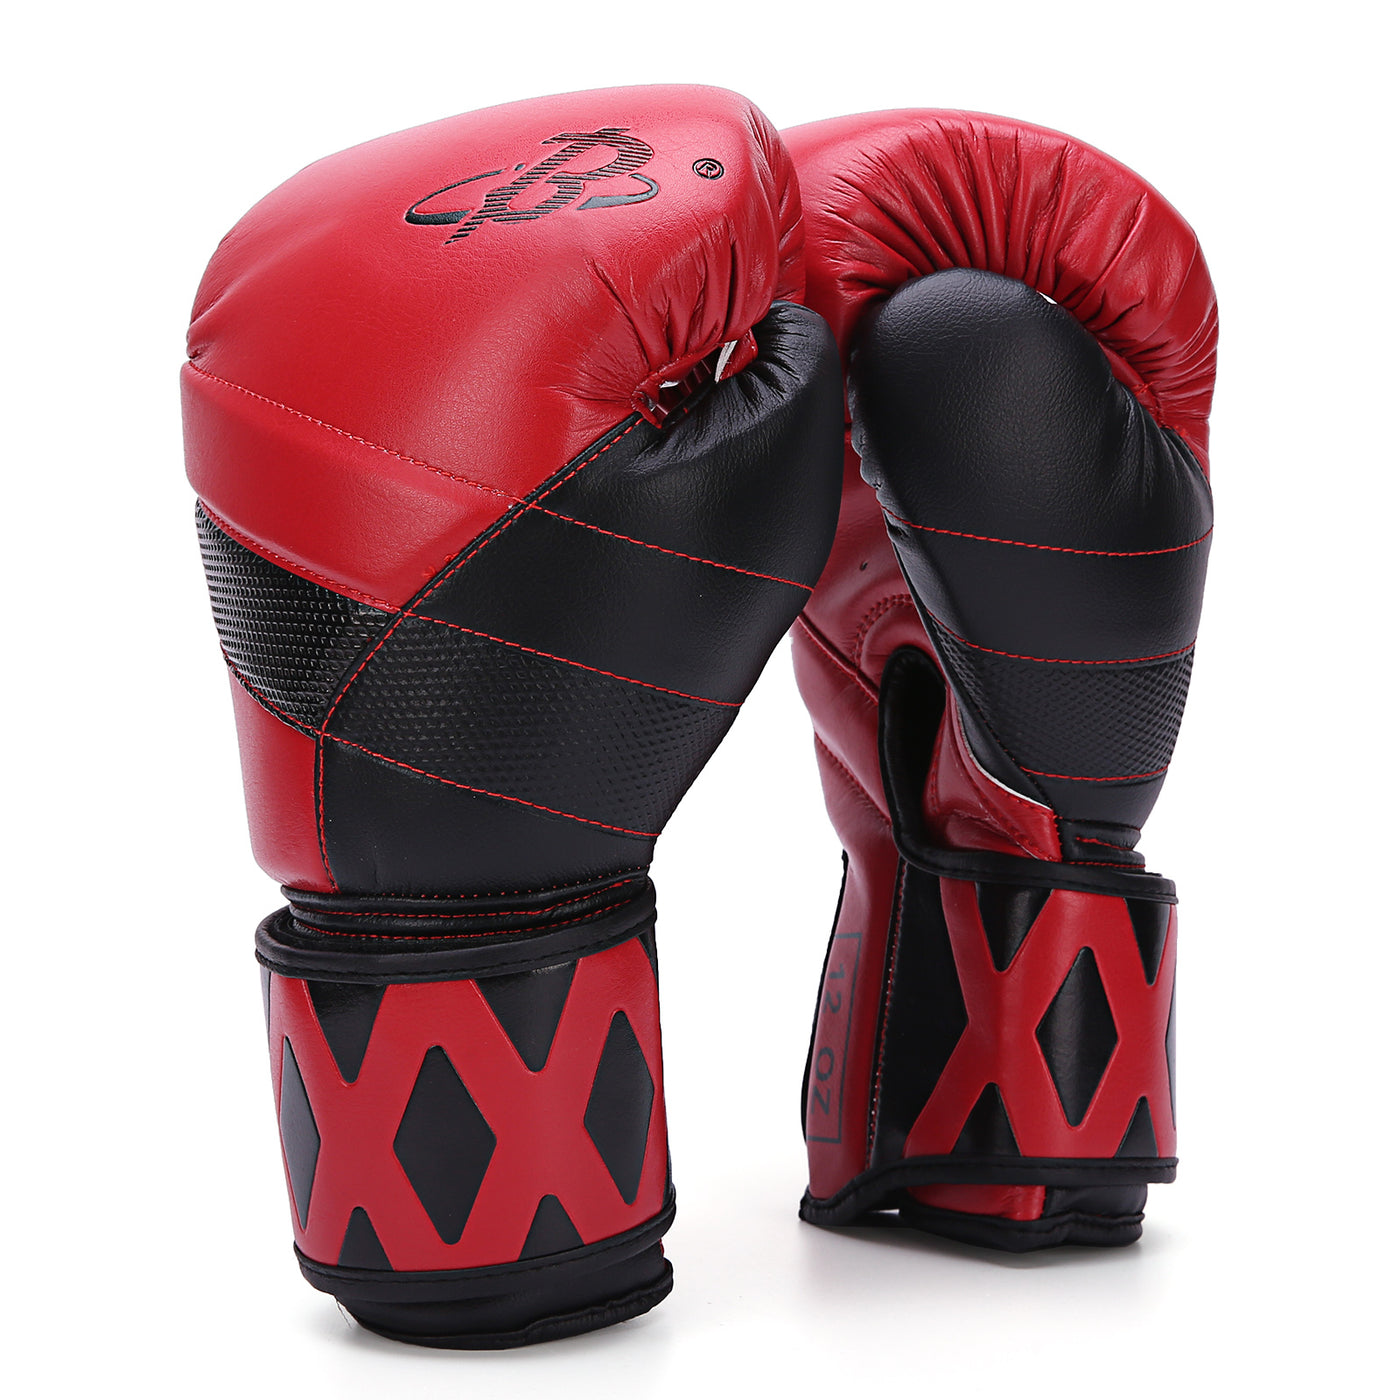 BOXING GLOVES - B LUCK SHOE LEATHER BOXING TRAINING GLOVES FOR KIDS, YOUTH ADULT 4Oz-16Oz